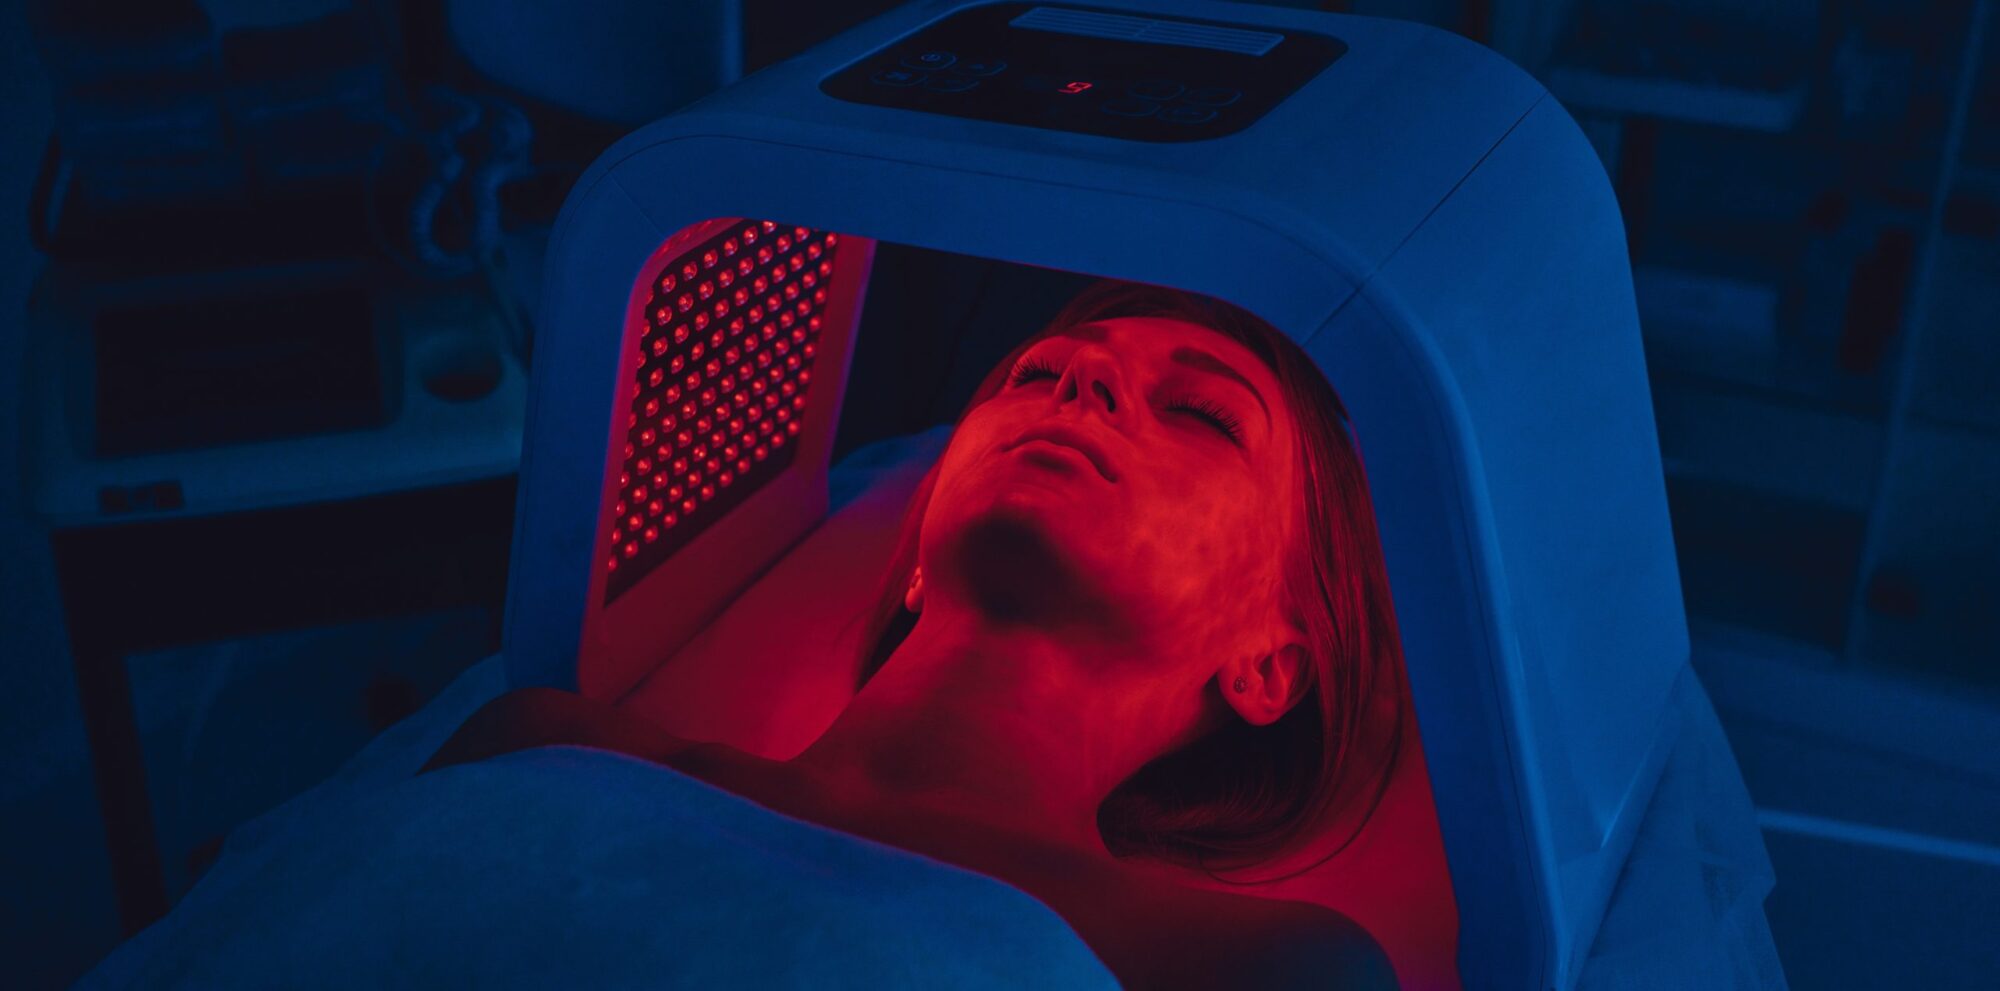 LED red light is treating the facial skin of a young woman. High quality 4k footage